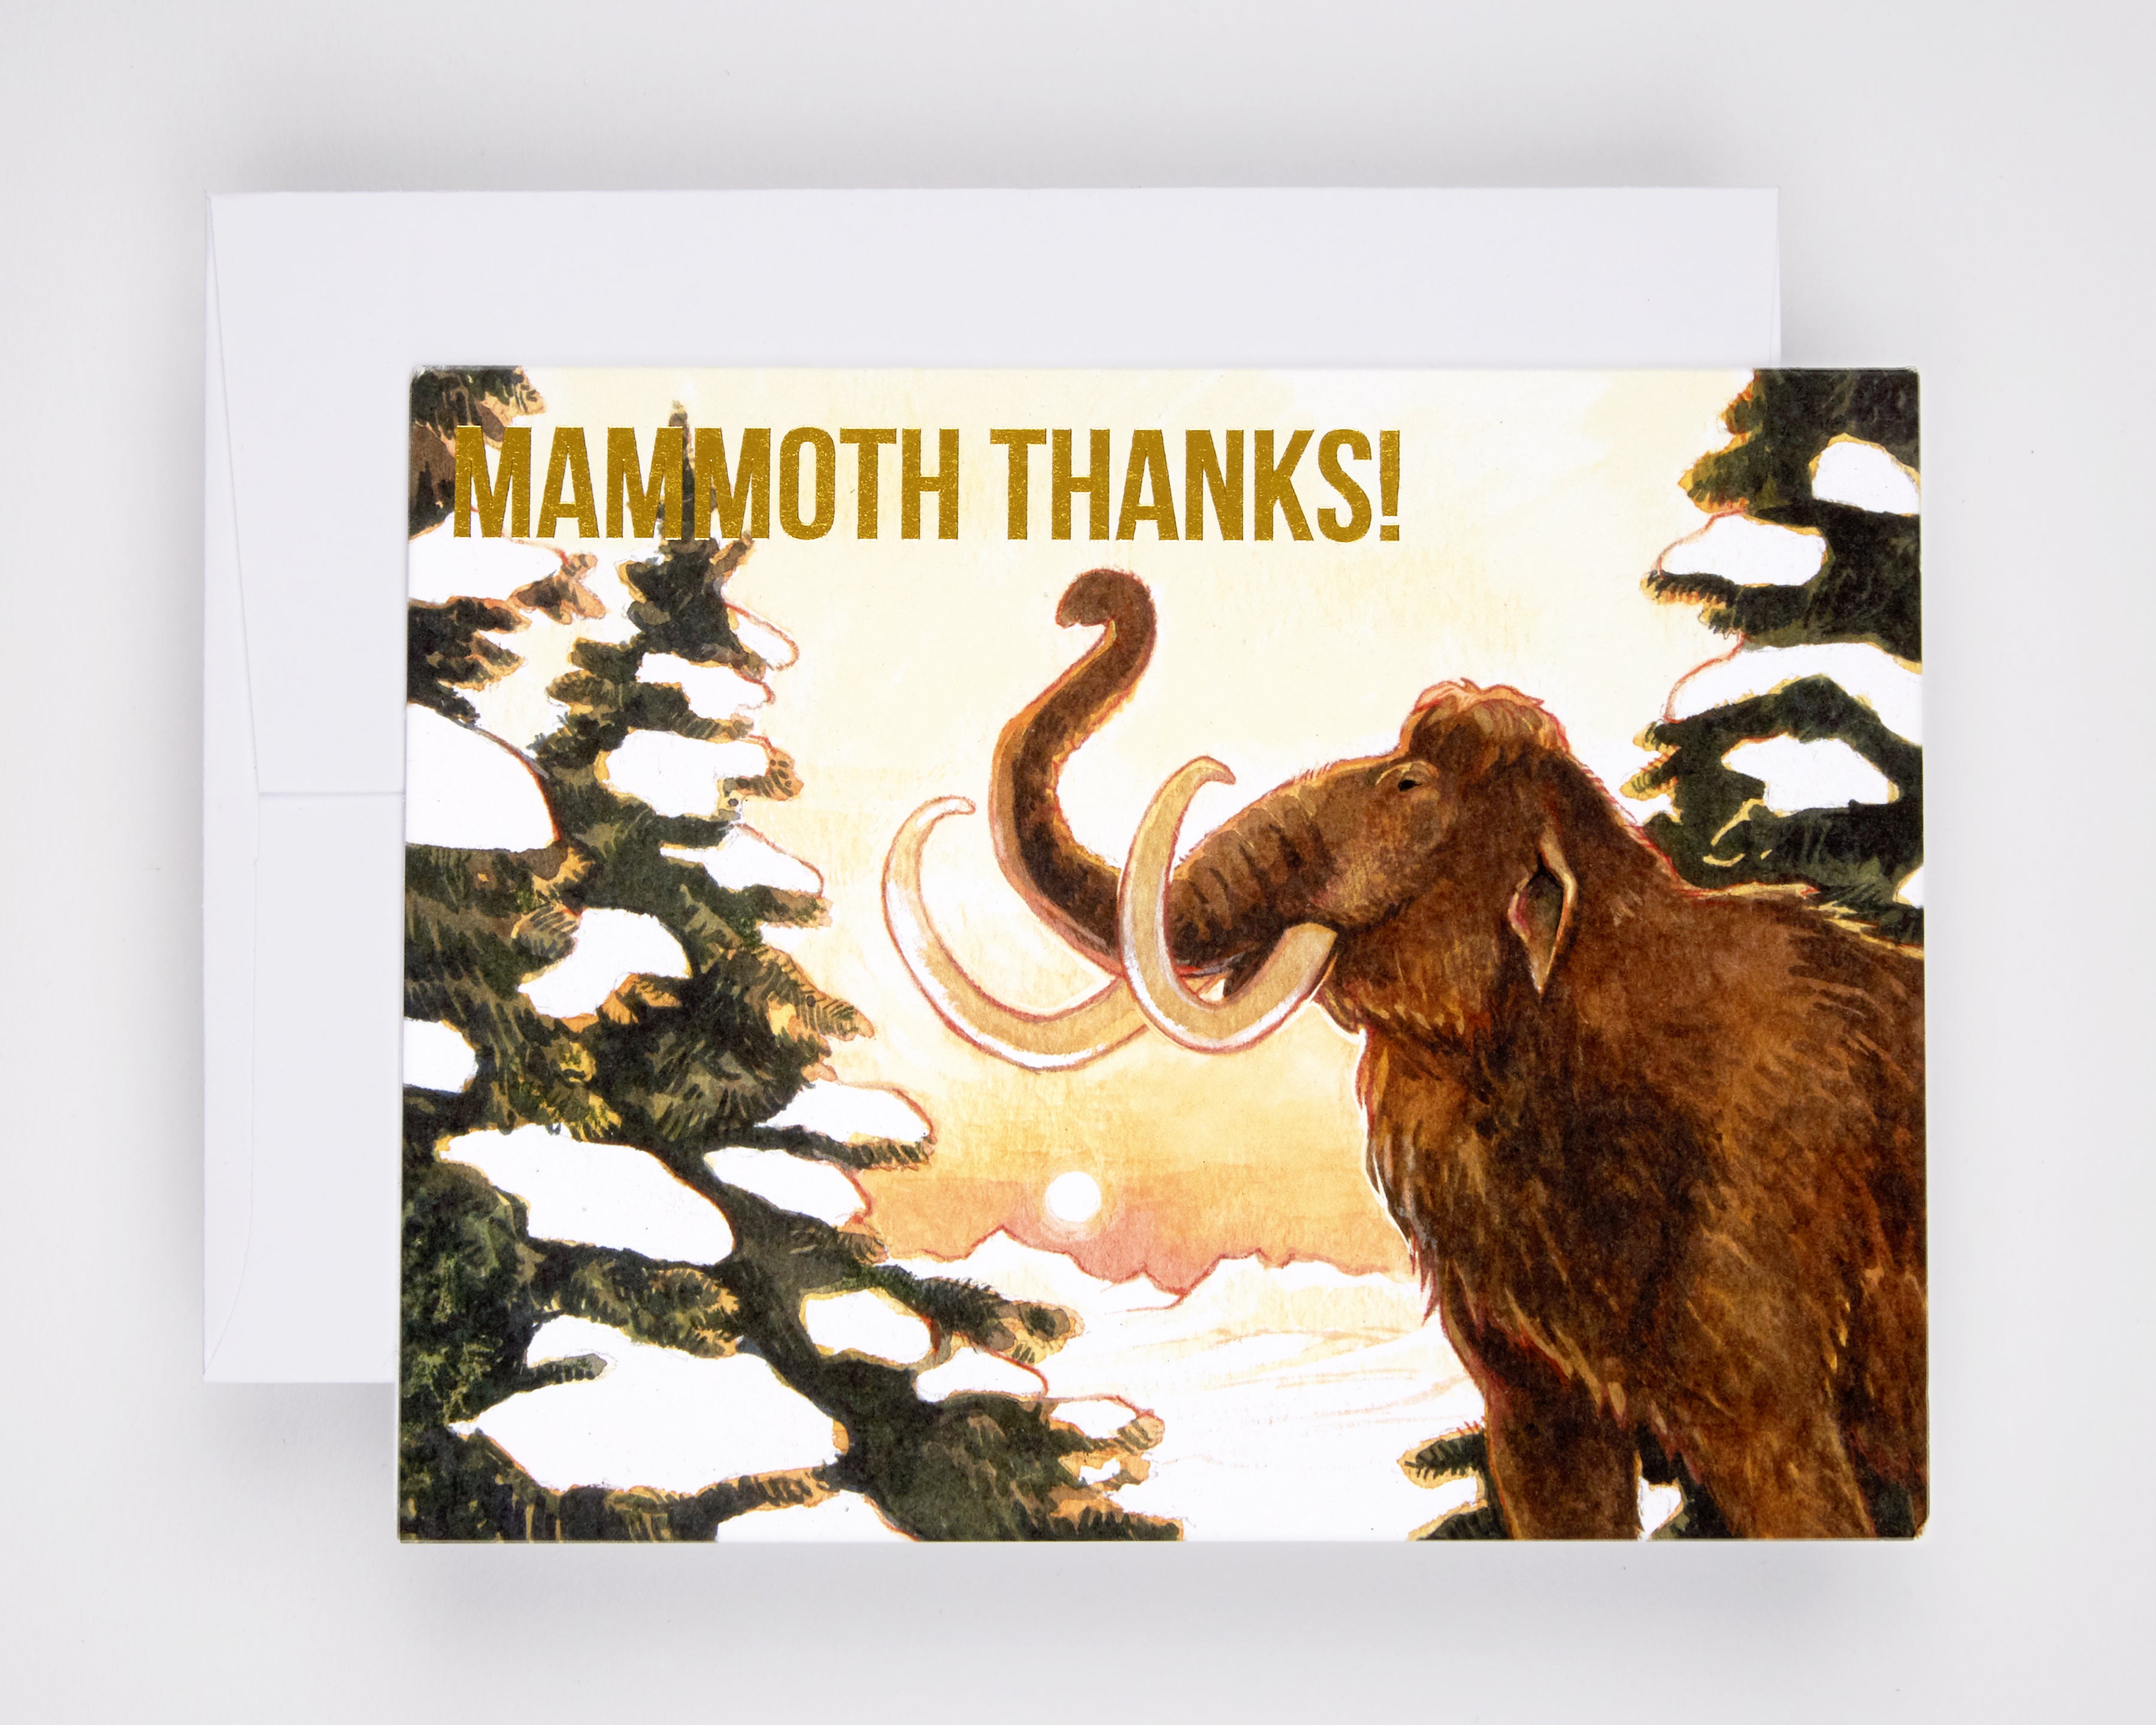 Greeting card featuring a wooly mammoth and the text Mammoth Thanks!